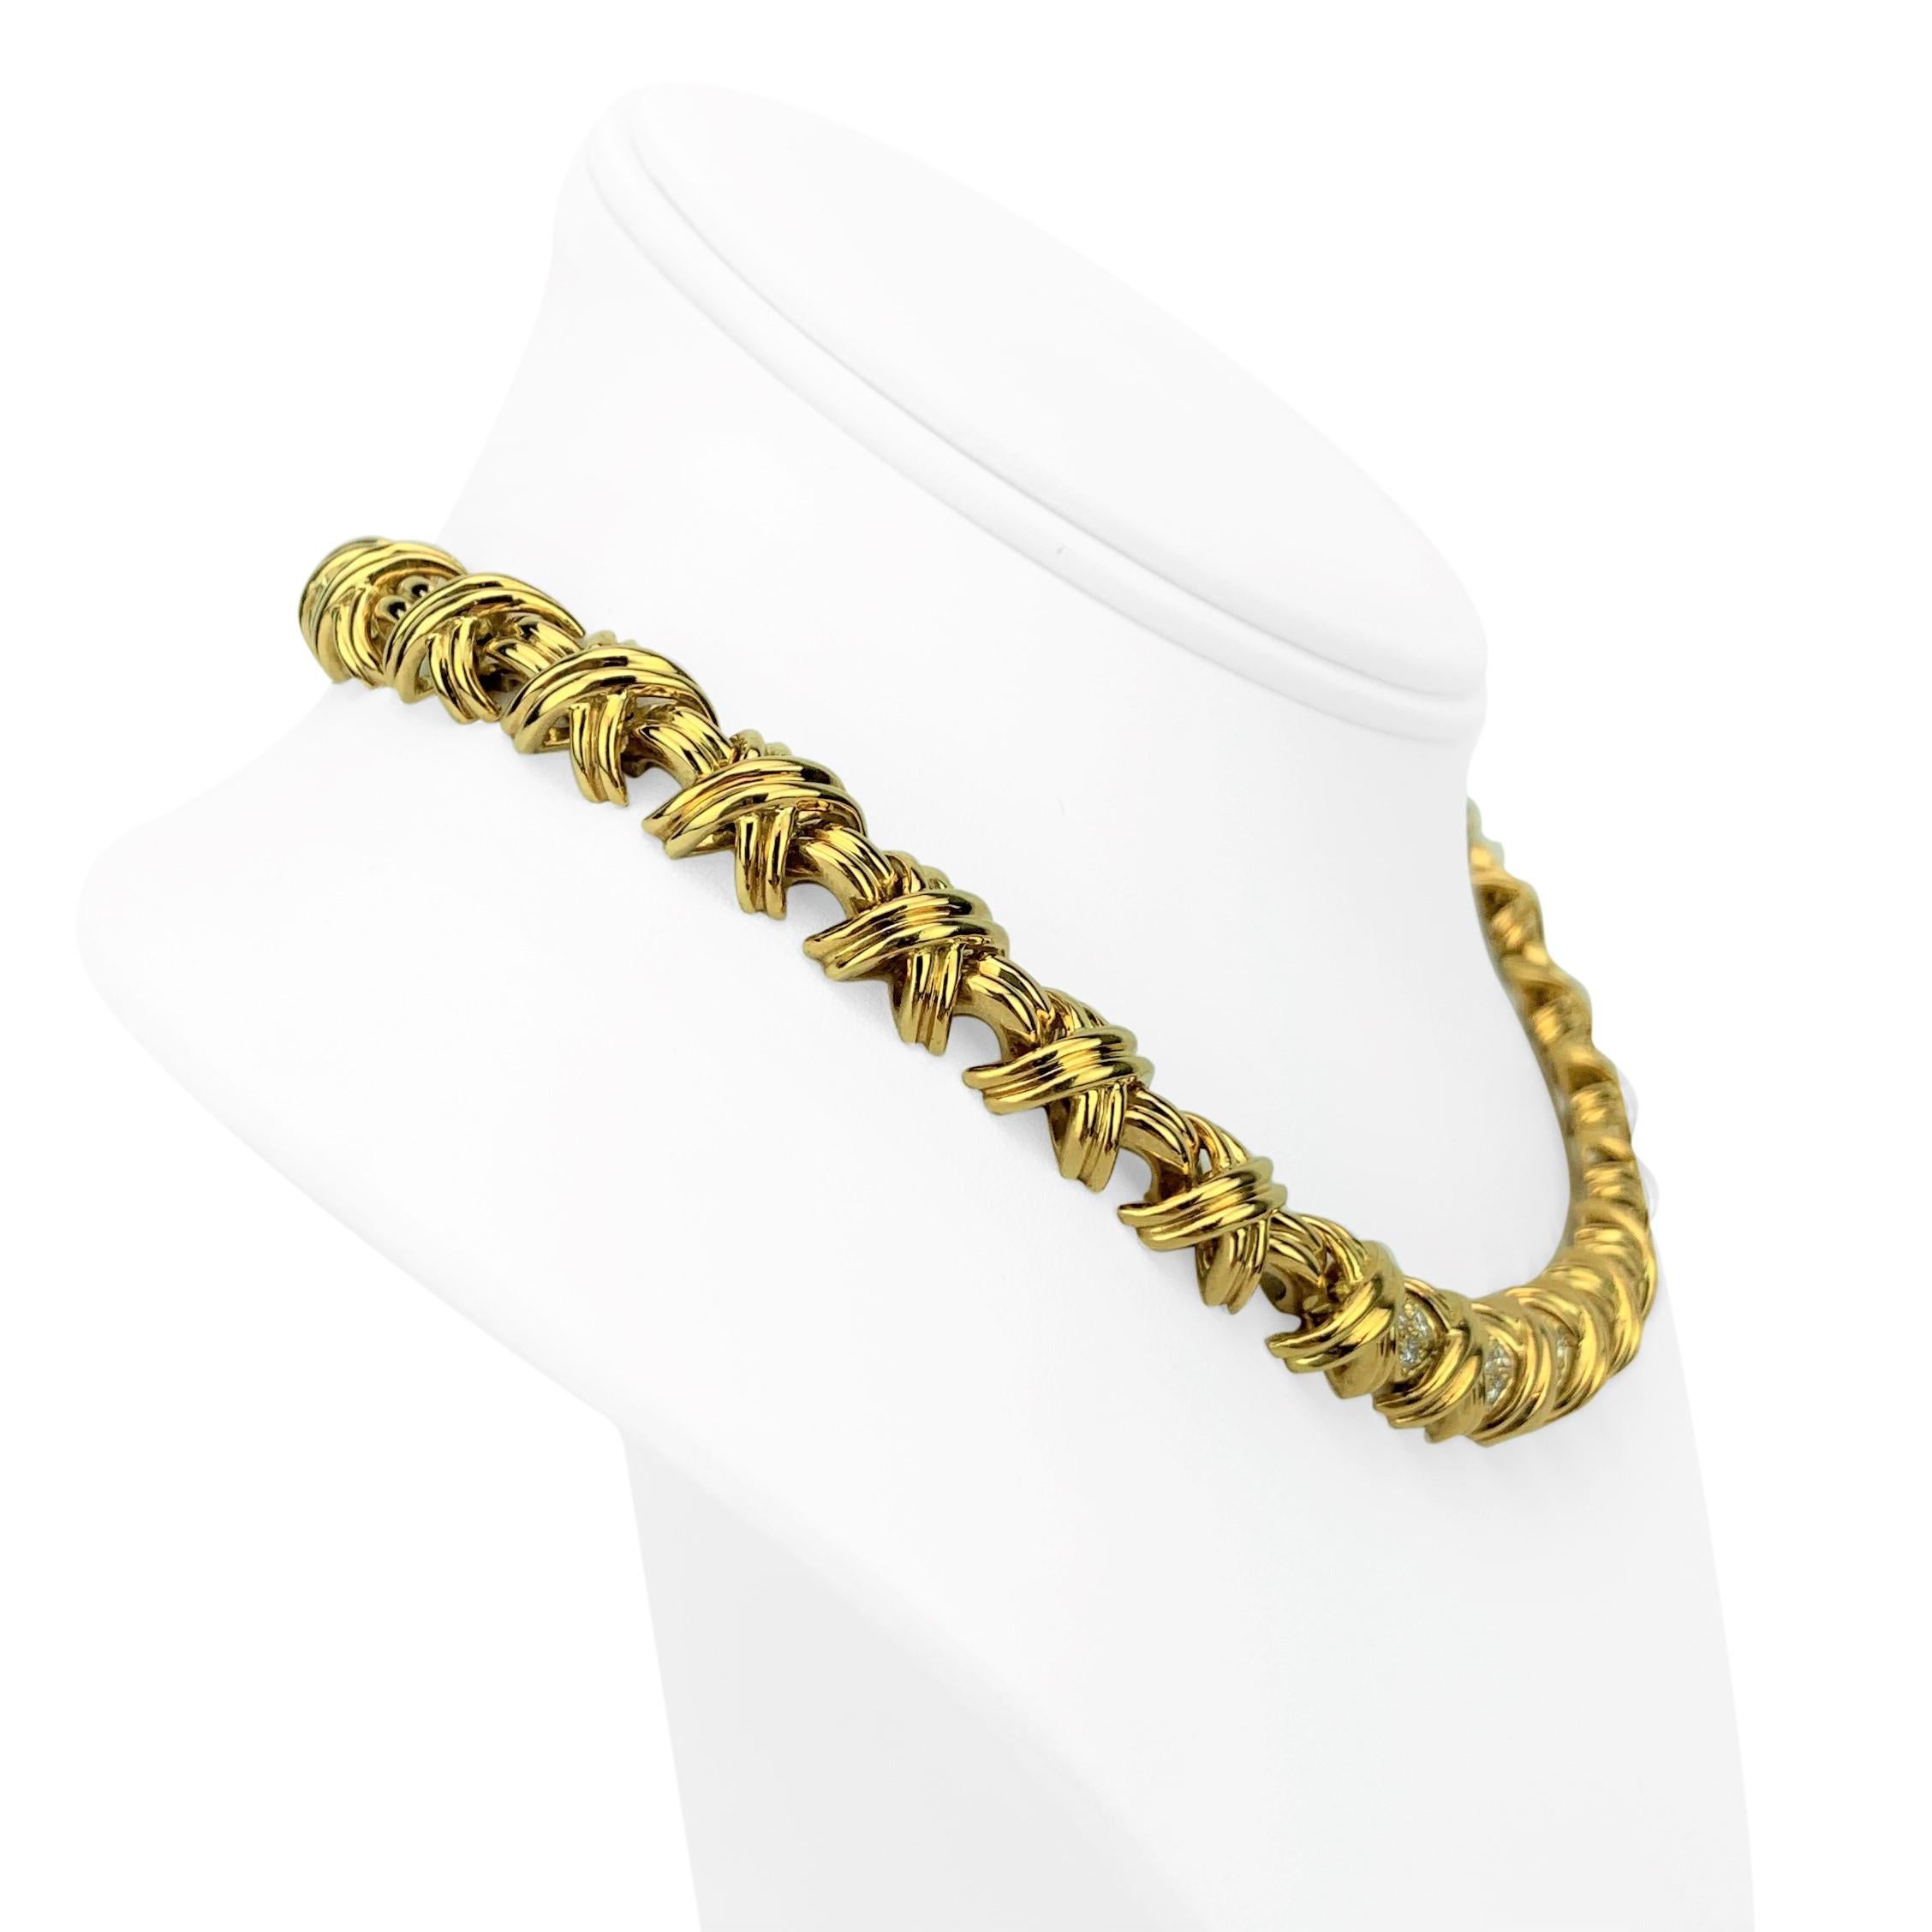 Tiffany & Co. 18k Yellow Gold and Diamond X Link Collar Necklace

Condition:  Excellent (Professionally Cleaned and Polished)
Metal:  18k Gold (Marked, and Professionally Tested)
Weight:  99.6g
Length:  16 Inches
Width:  11mm 
Diamonds:  32 Round